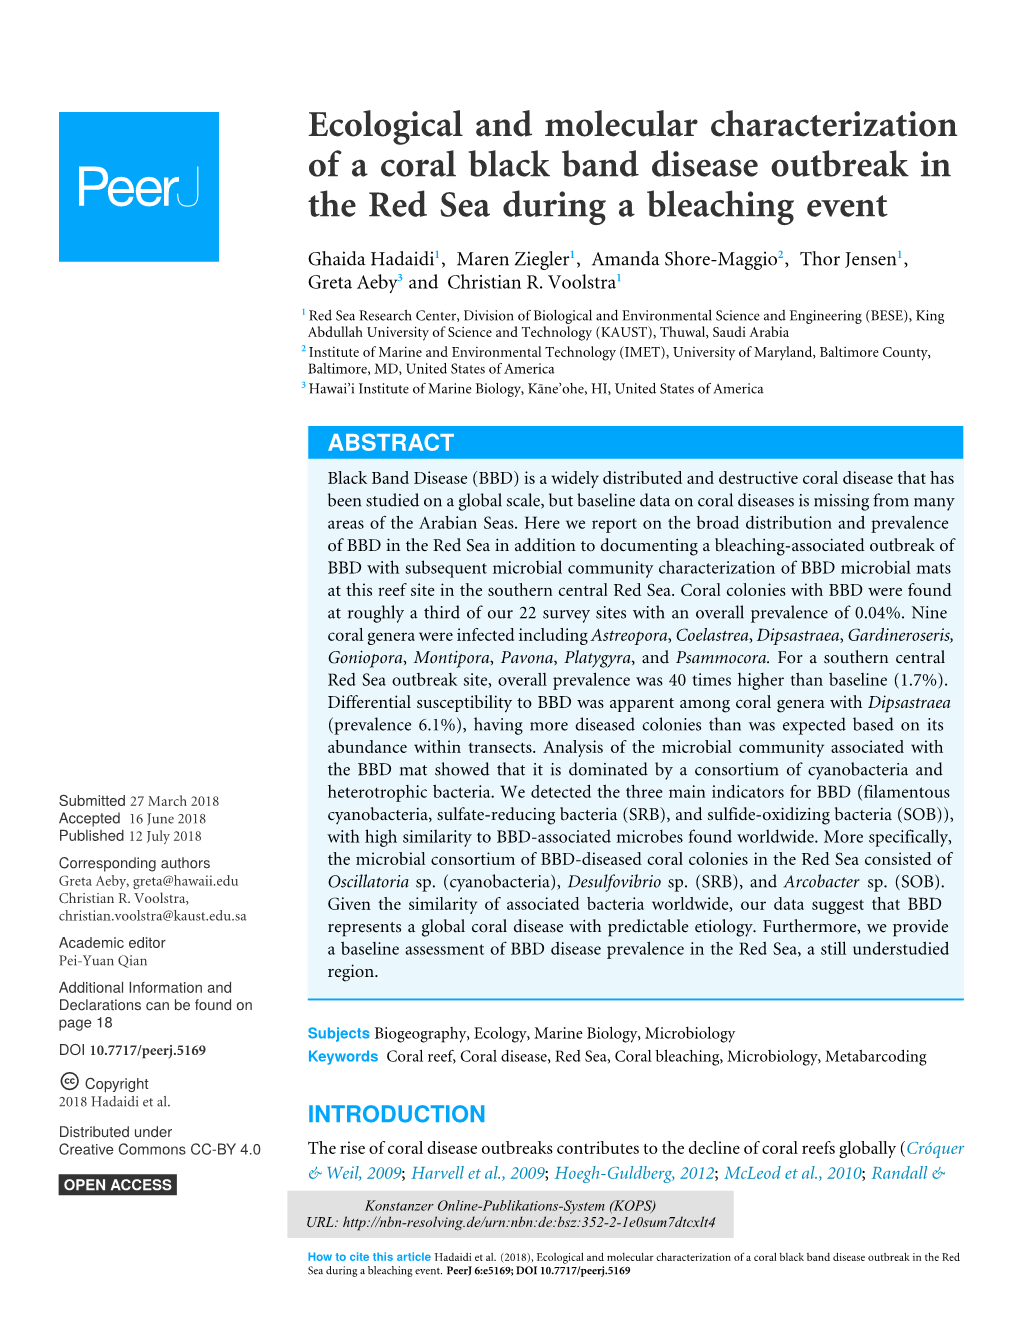 Ecological and Molecular Characterization of a Coral Black Band Disease Outbreak in the Red Sea During a Bleaching Event